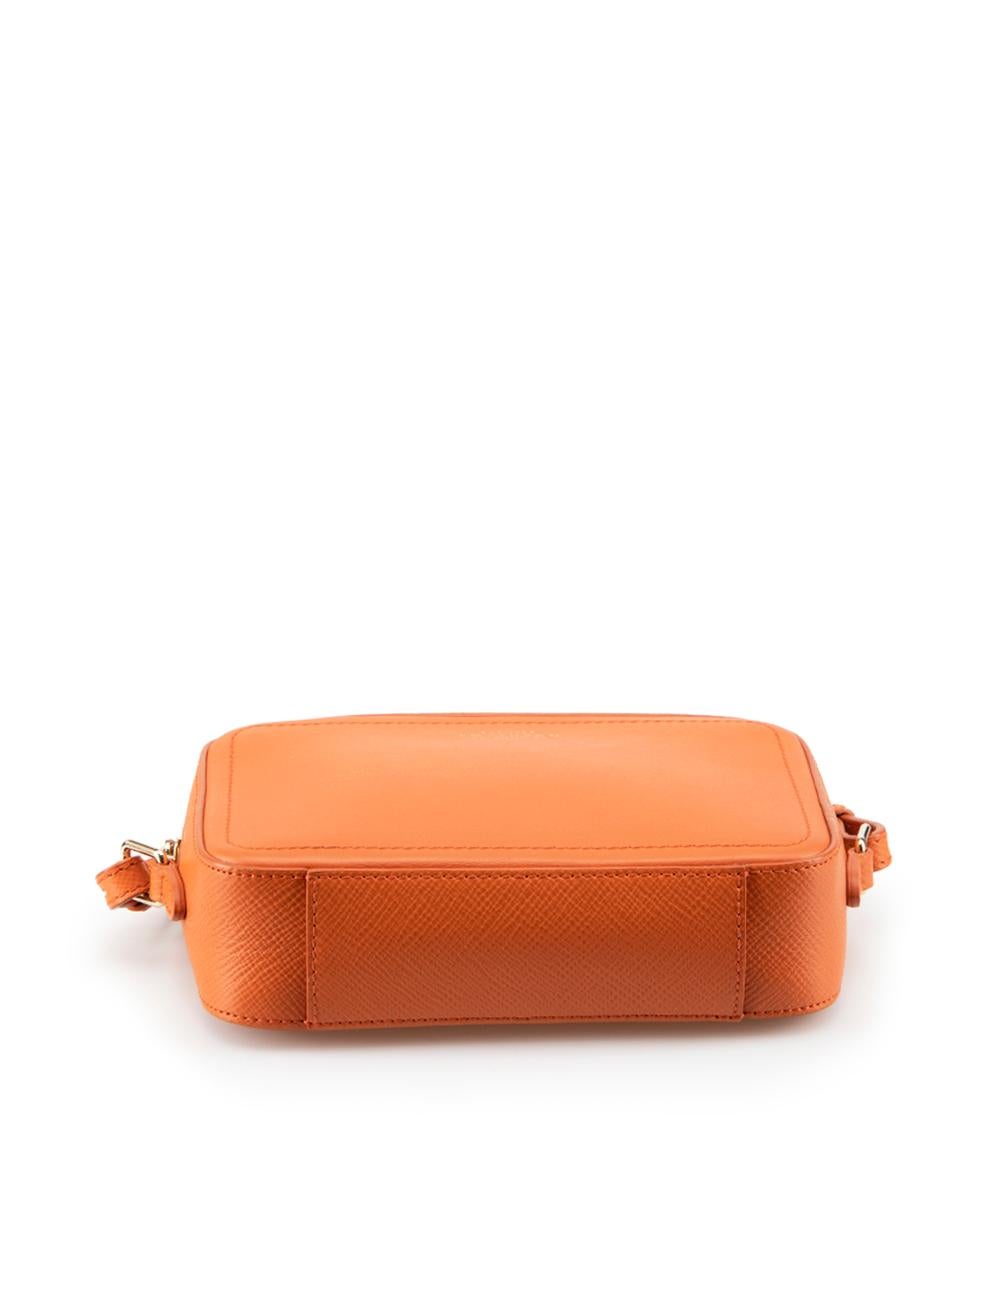 Smythson Orange Leather Crossbody Bag In Excellent Condition For Sale In London, GB